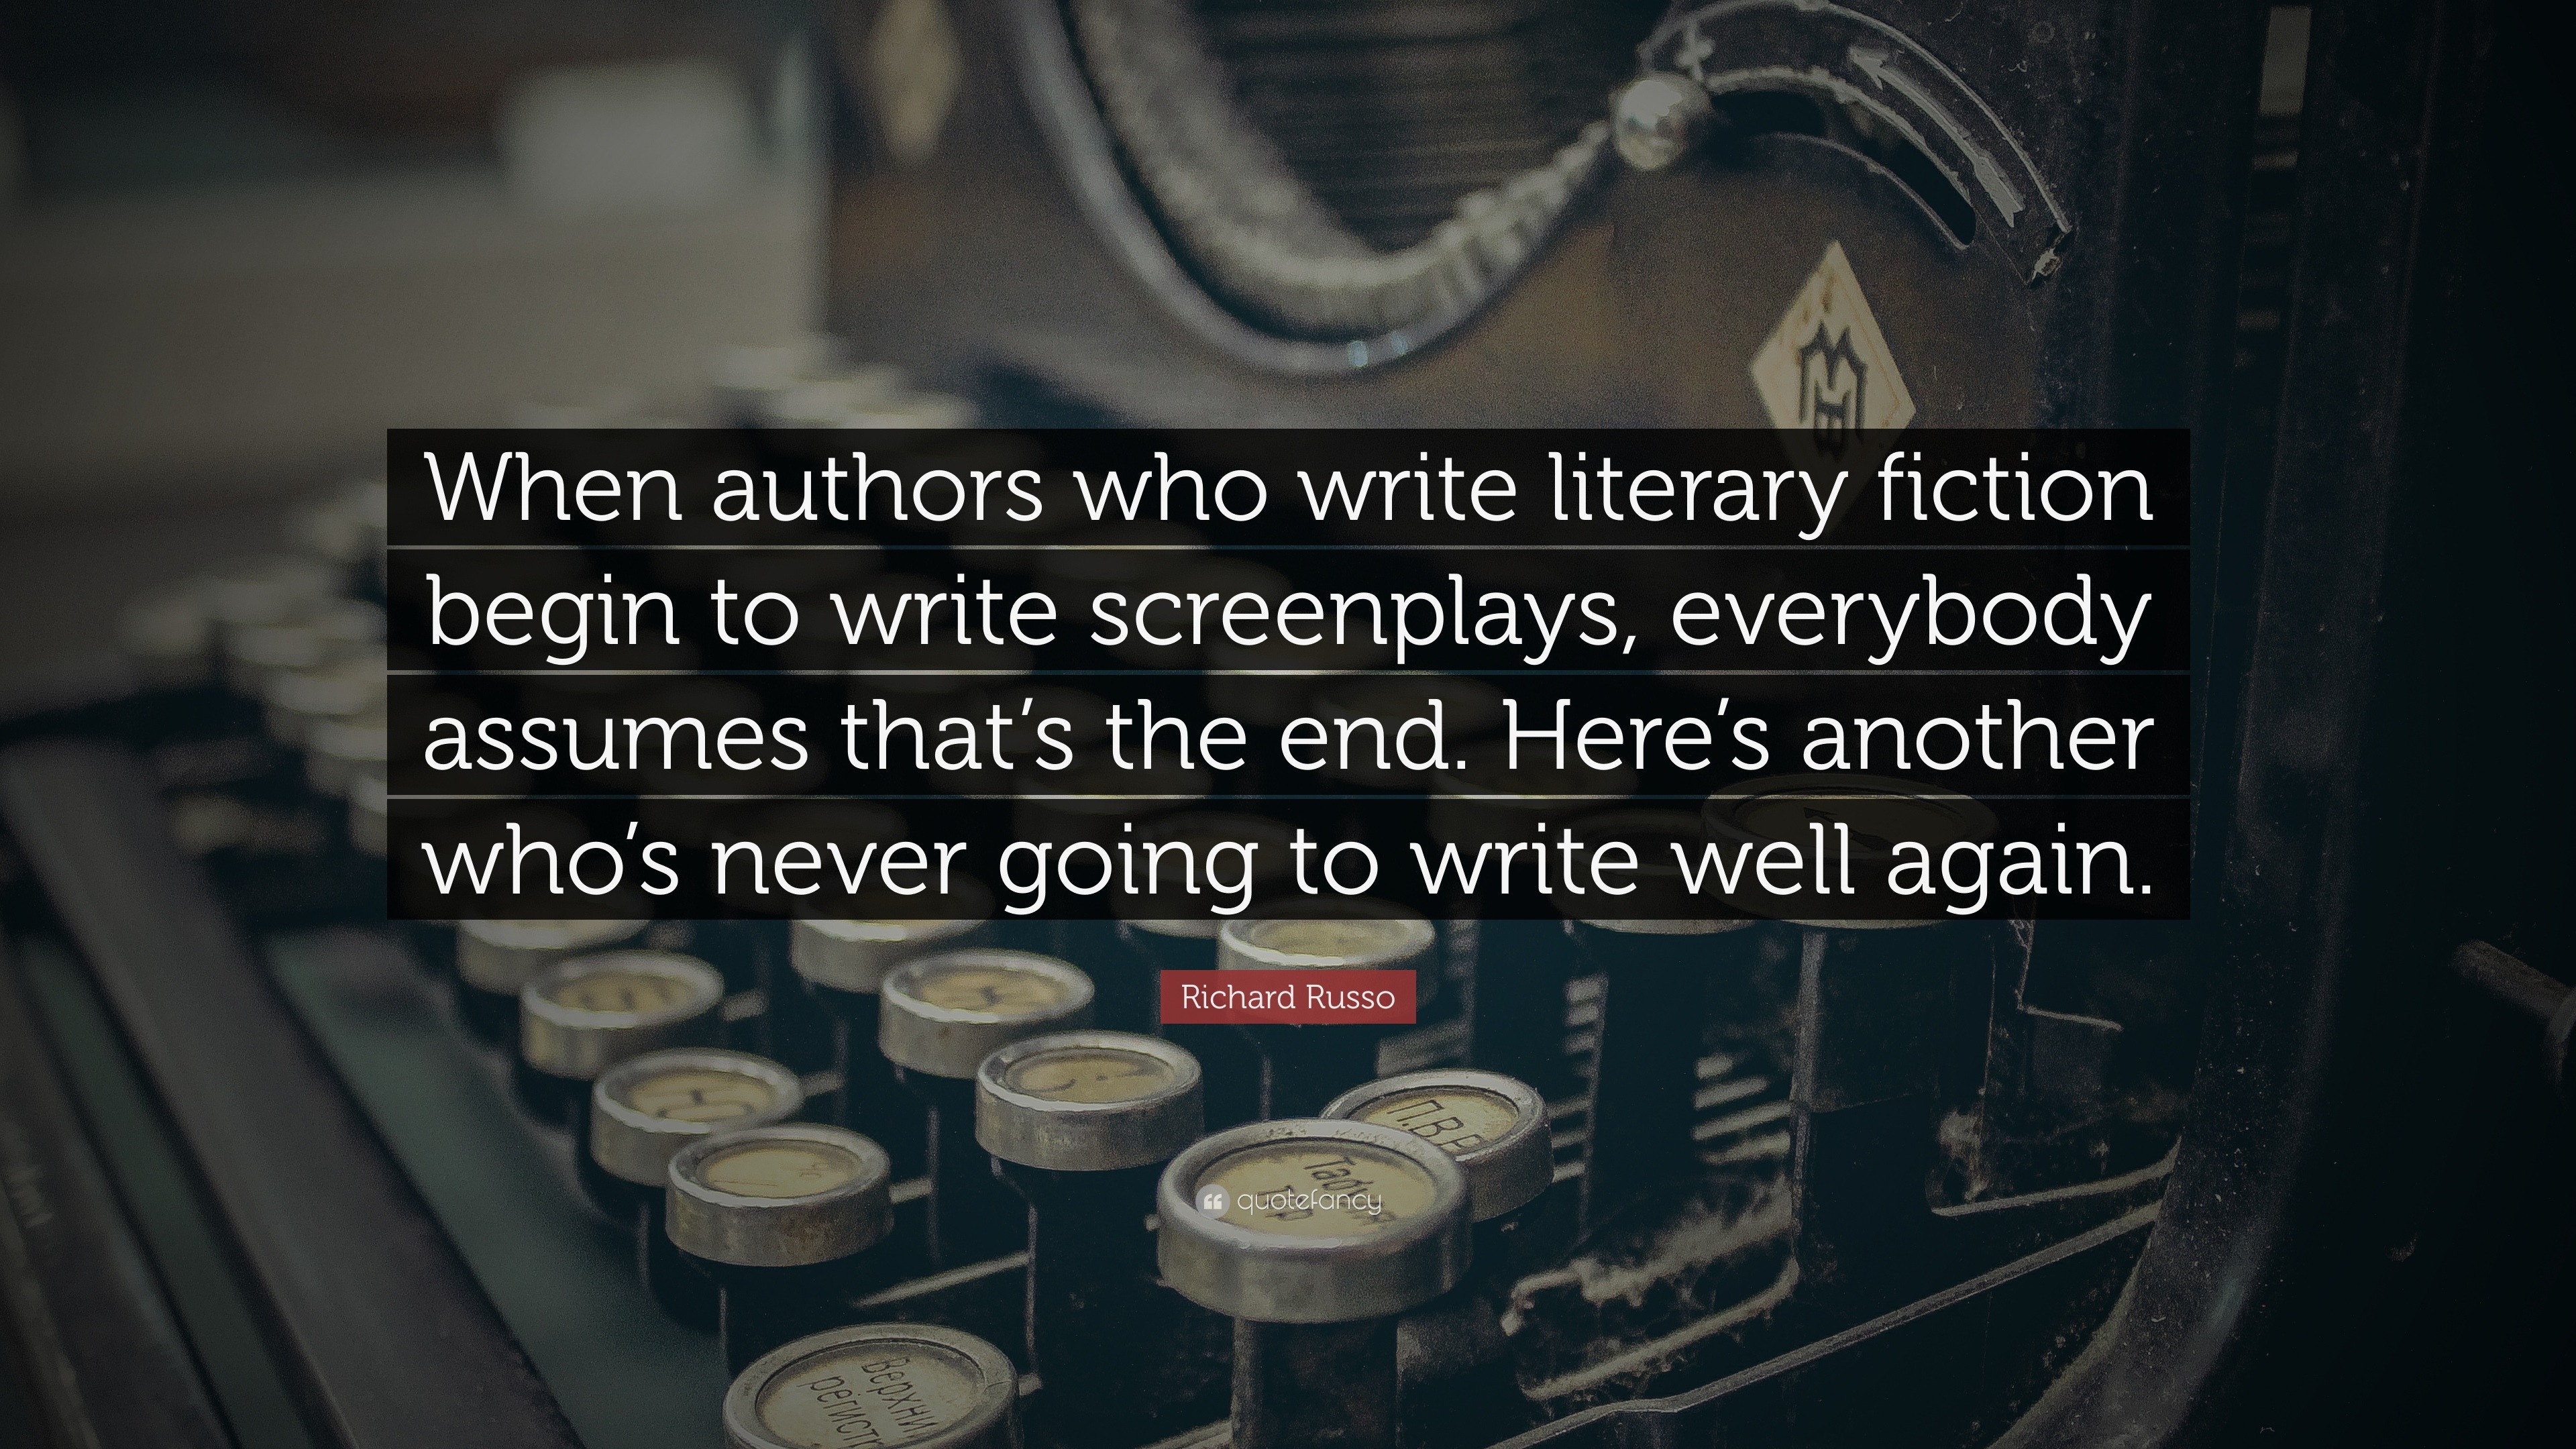 Richard Russo Quote: “When authors who write literary fiction begin to